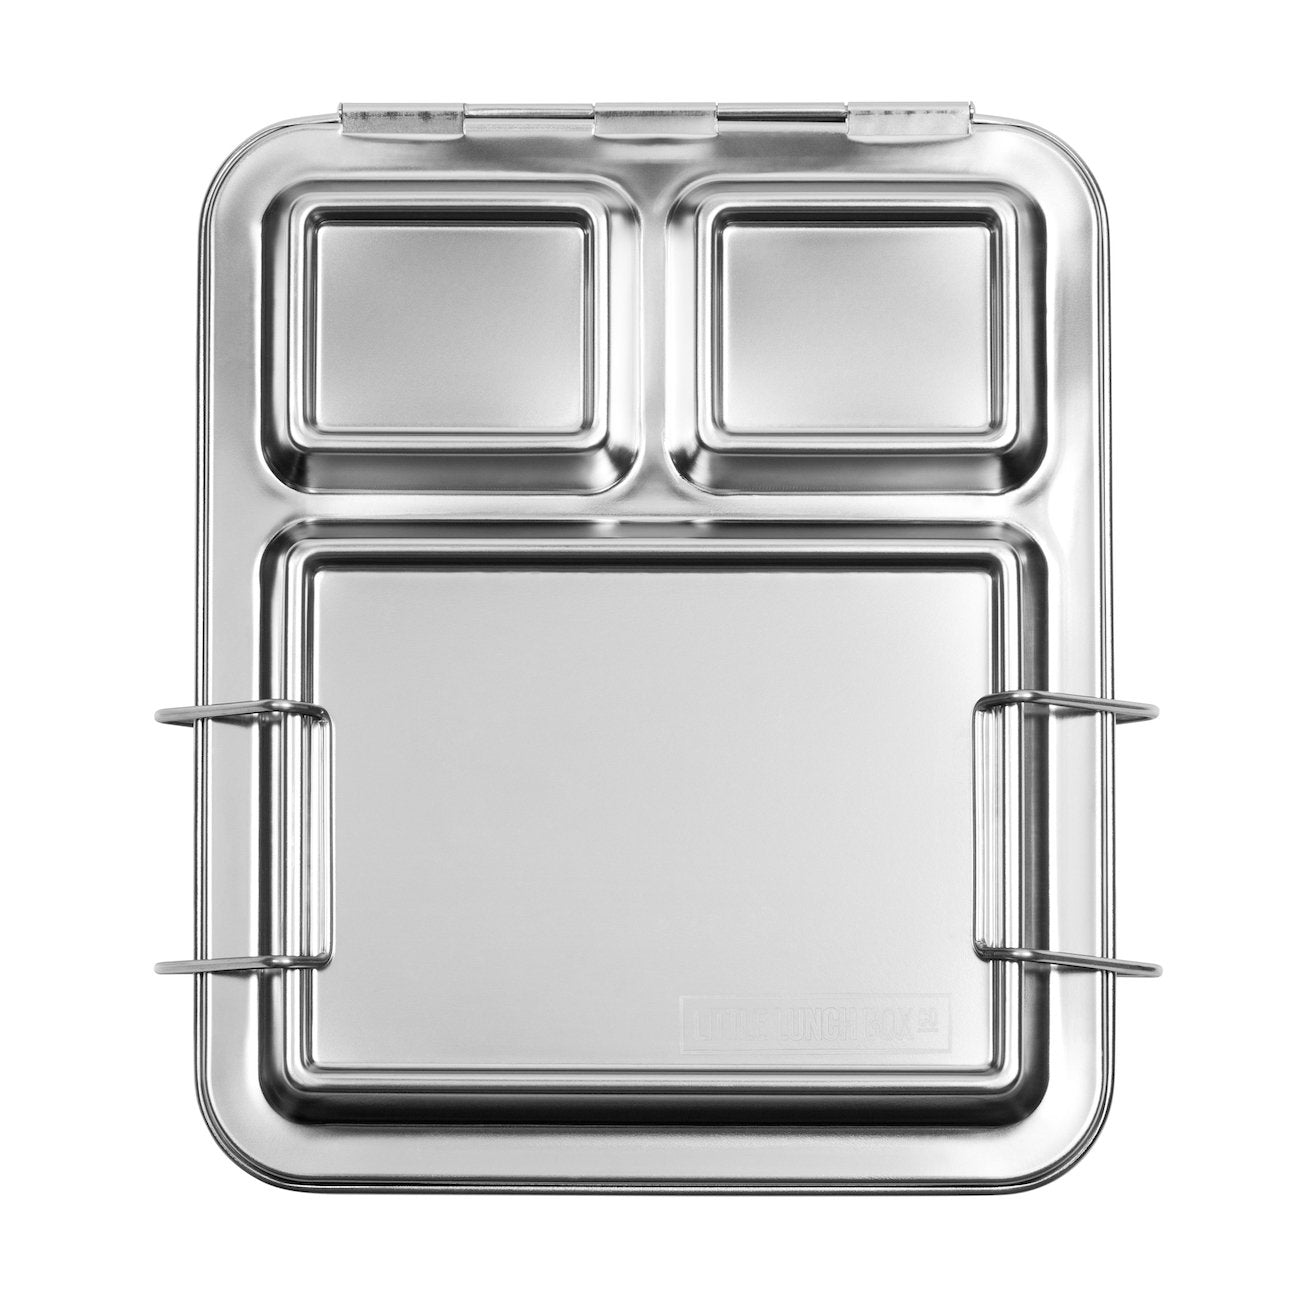 Little Lunch Box Co.: Bento Stainless Maxi (Leakproof)